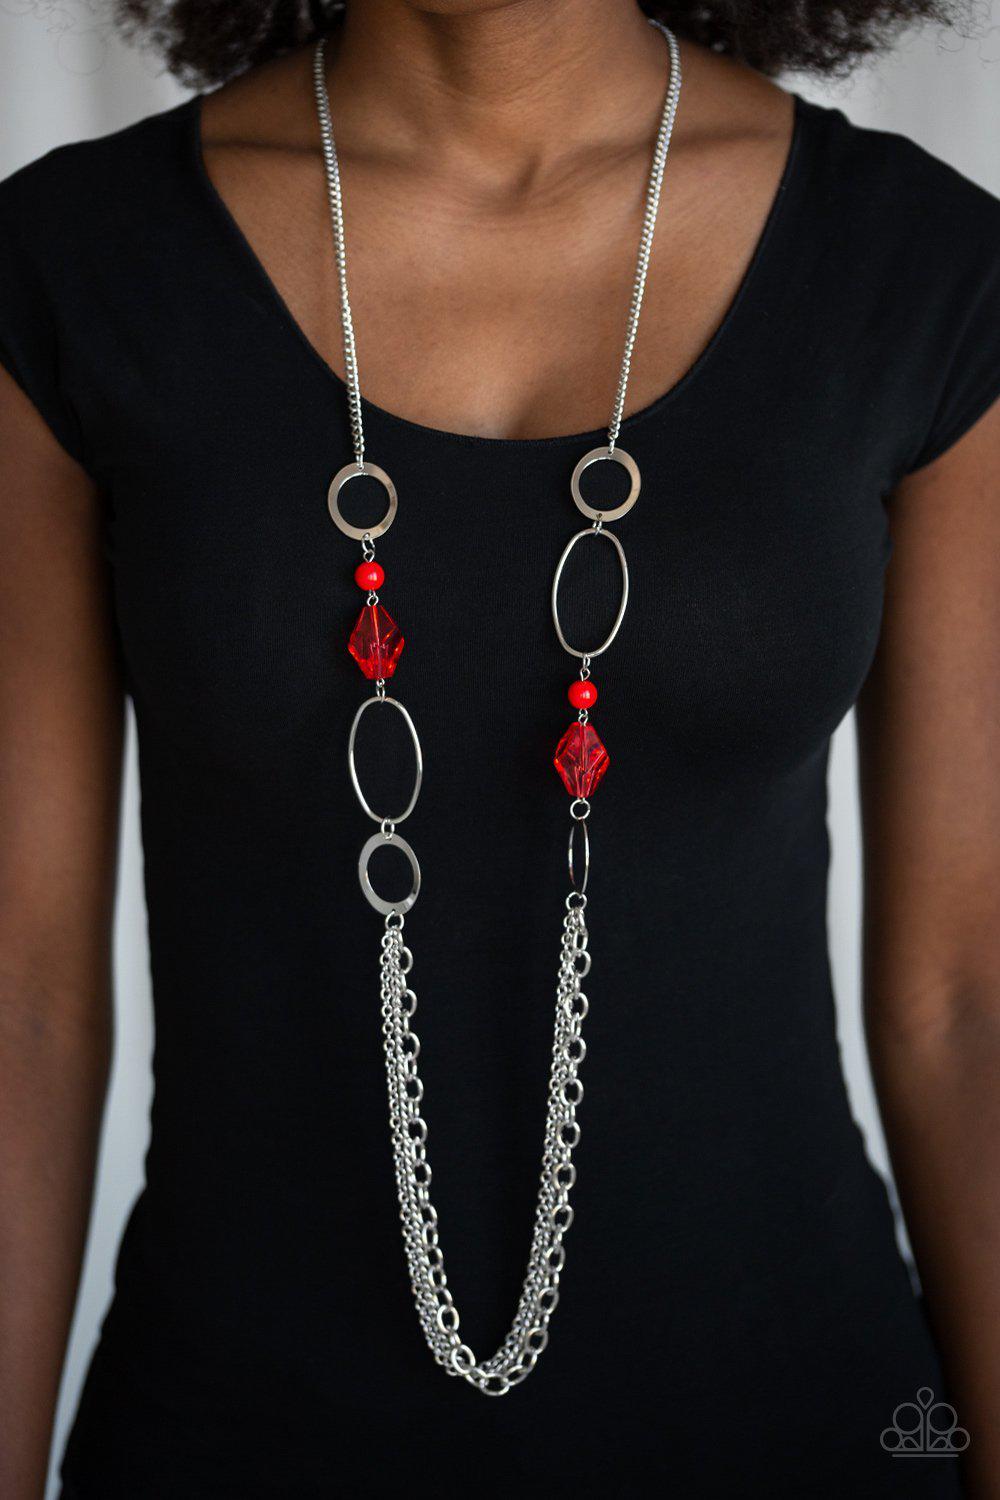 Jewel Jubilee Silver and Red Necklace - Paparazzi Accessories-CarasShop.com - $5 Jewelry by Cara Jewels